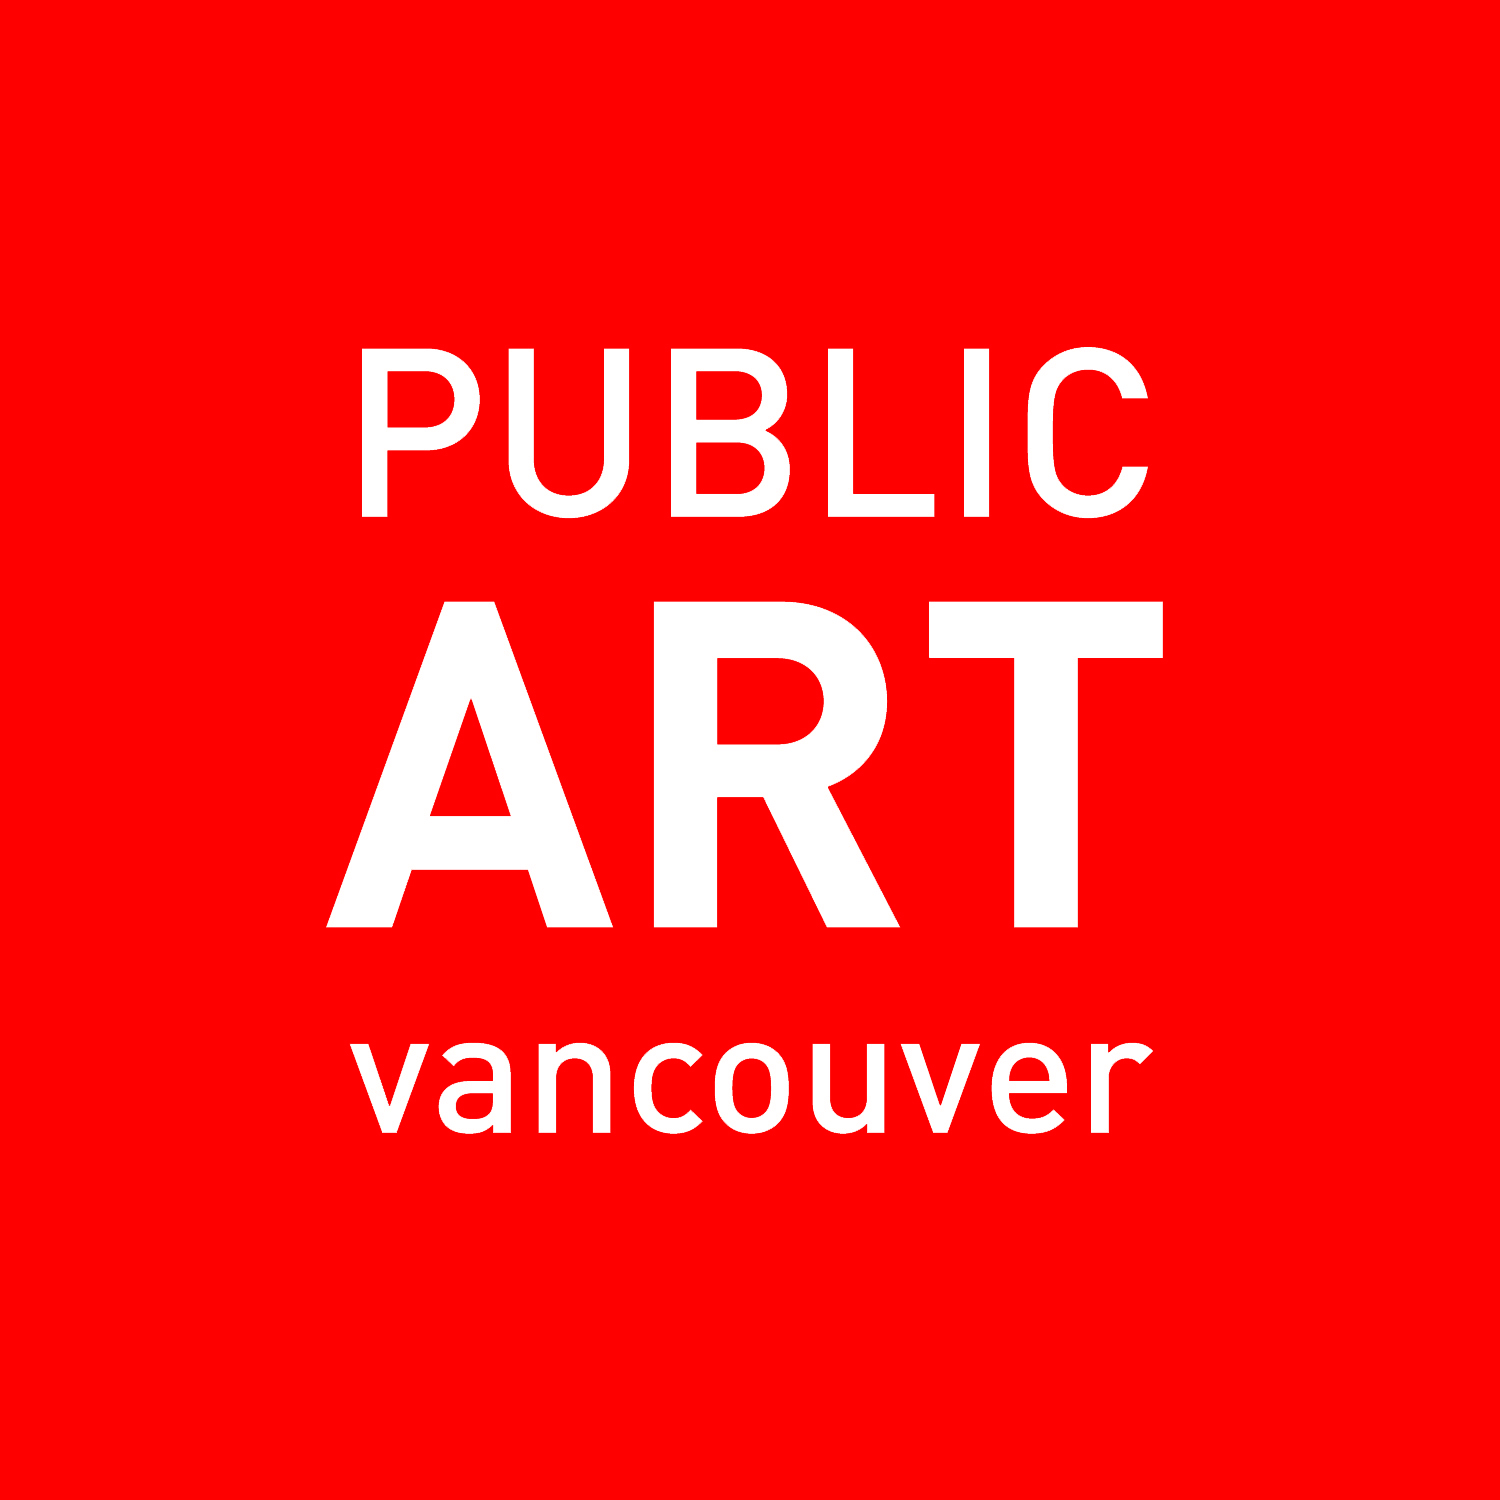 Public Art Vancouver Wordmark with Red background